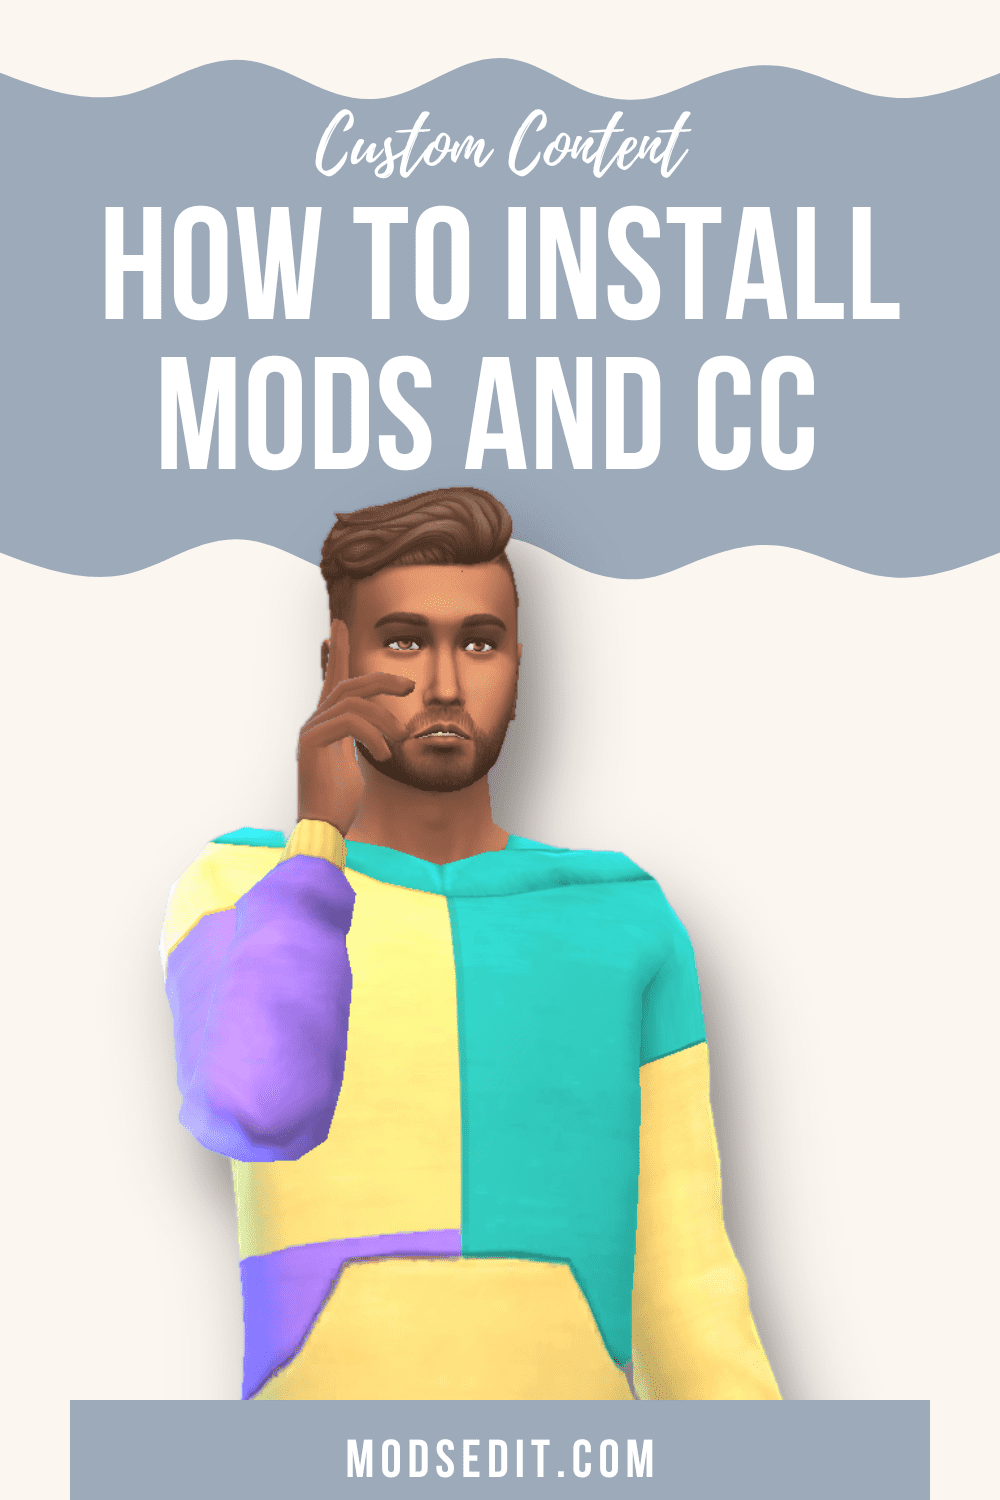 HOW TO INSTALL MODS AND CC 